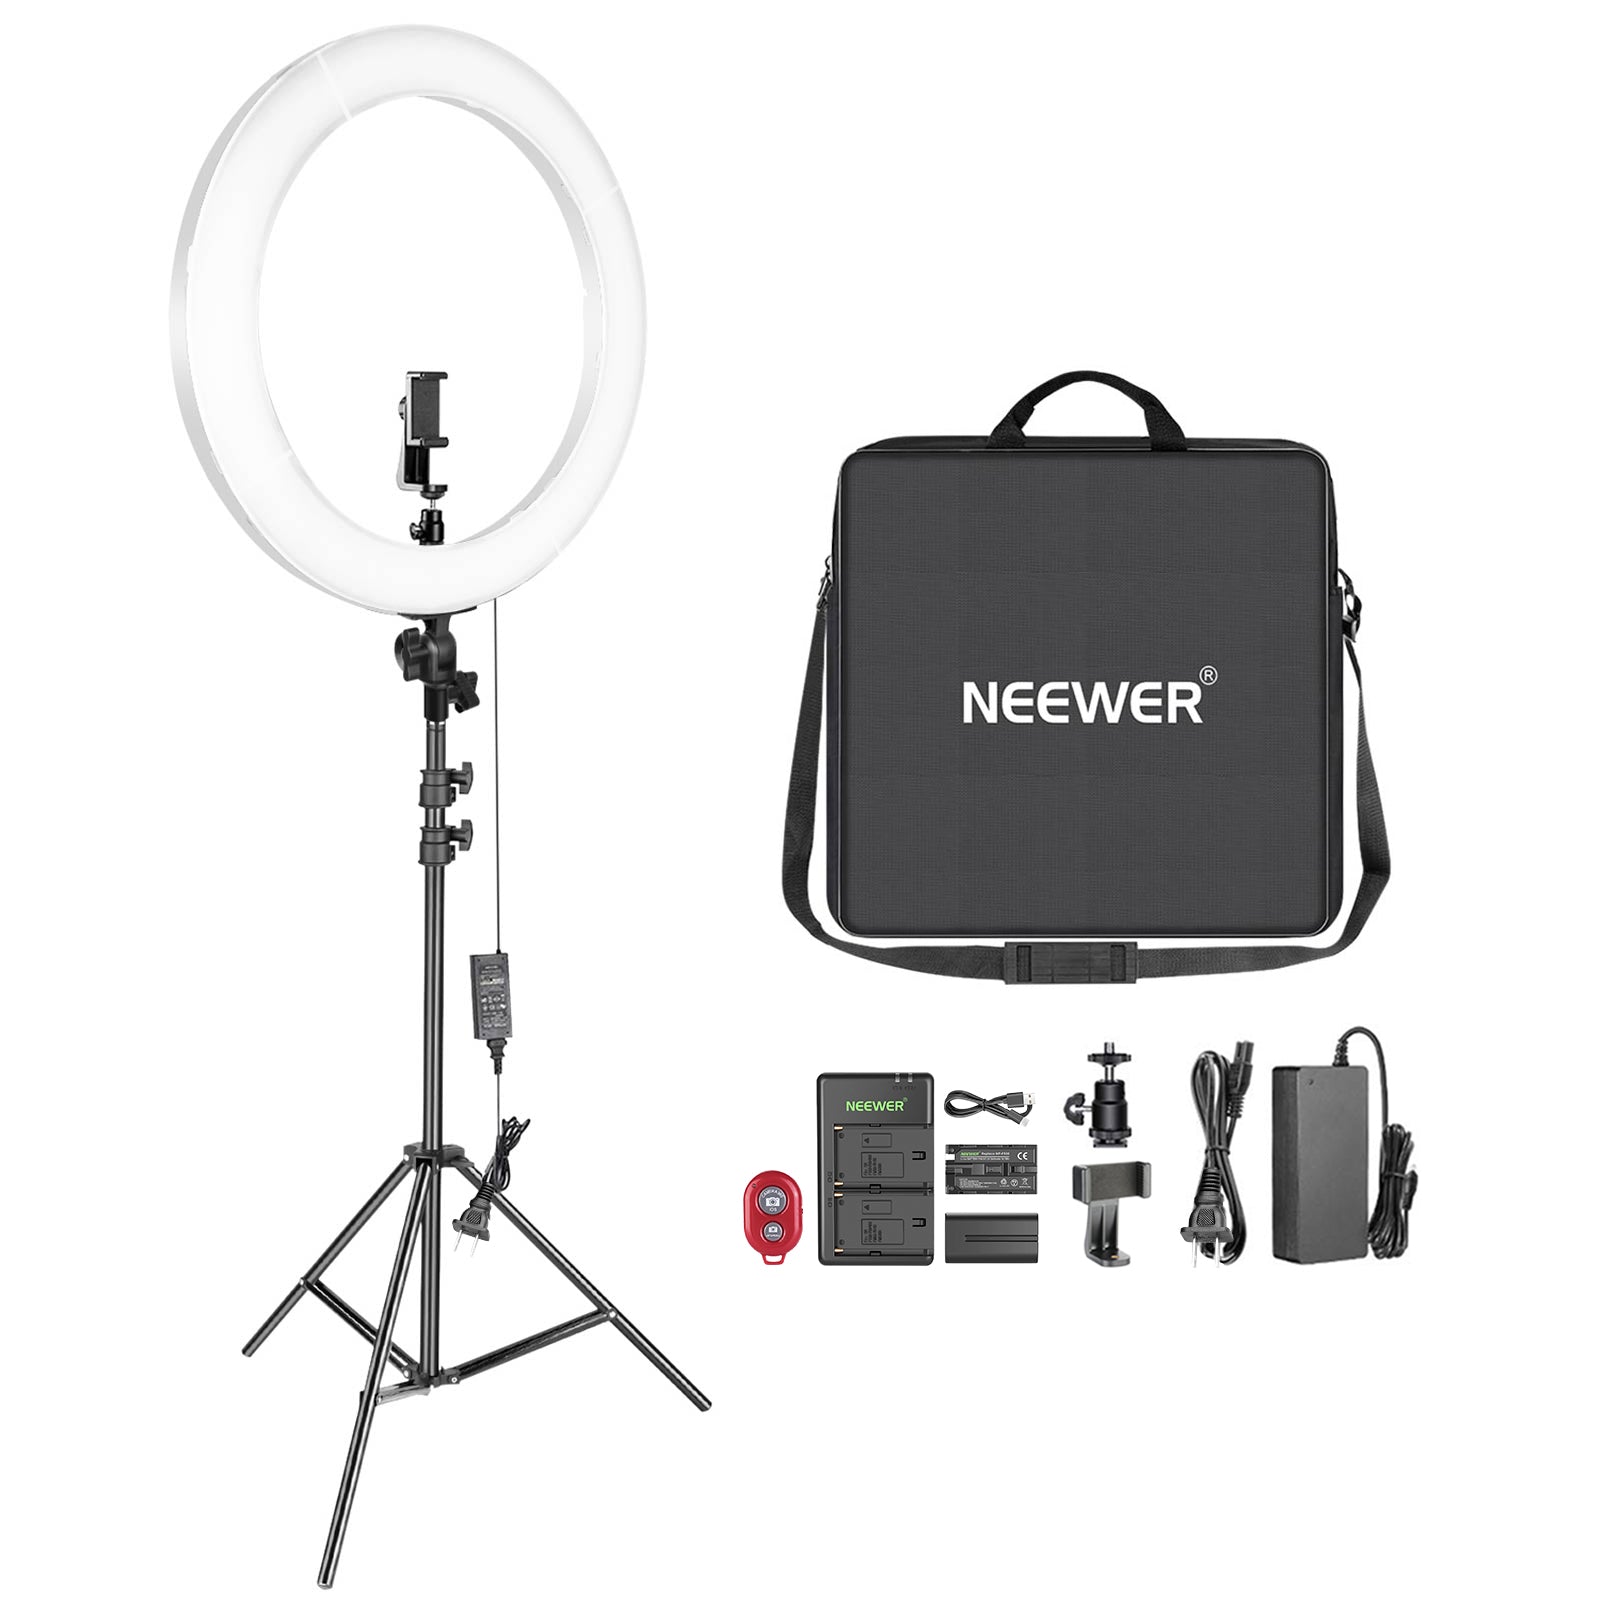 Neewer Ring Light review